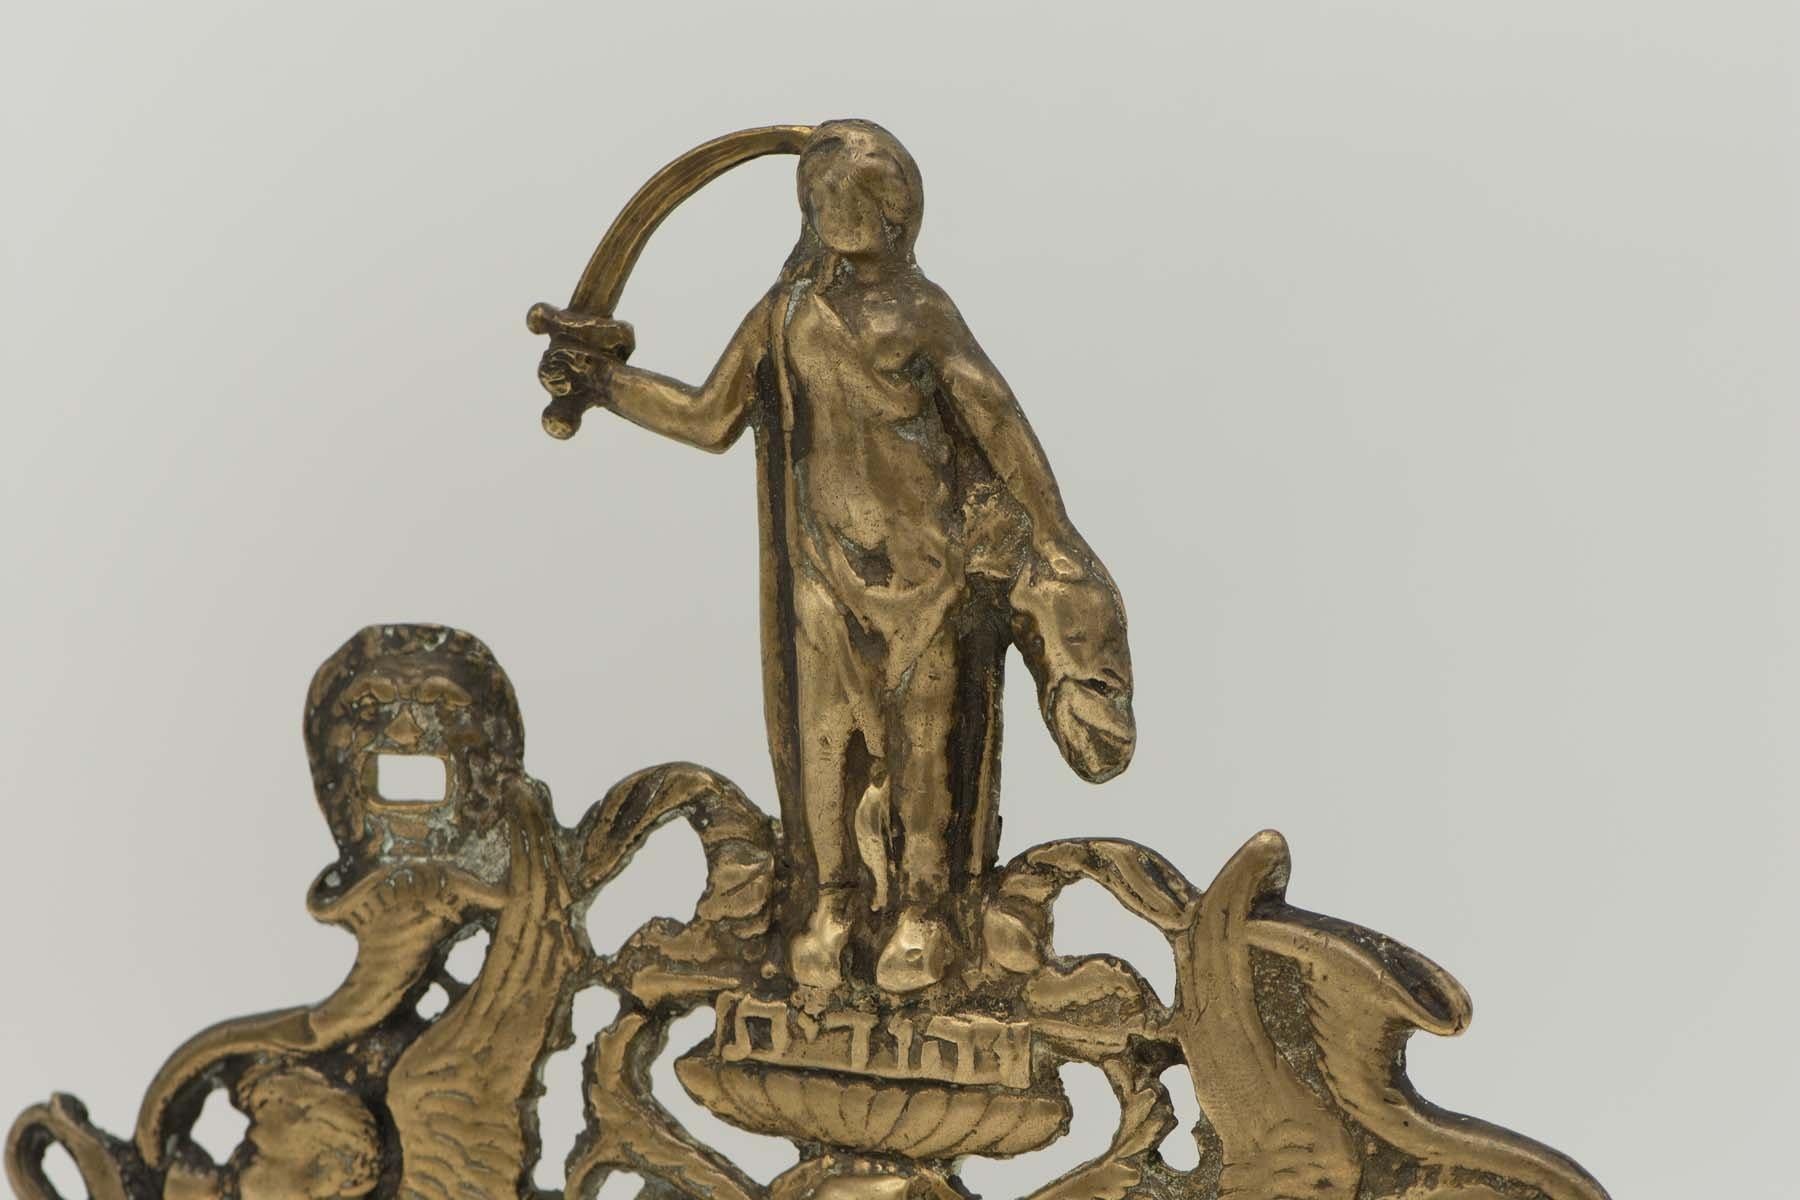 Brass Hanukkah lamp menorah, Italy, circa 1750. 
The backplate is decorated with two winged figures holding vases and blowing trumpets, and backed by a symbol of a bent leg with vase shaped pediment upon which stands the figure of Judith holding a